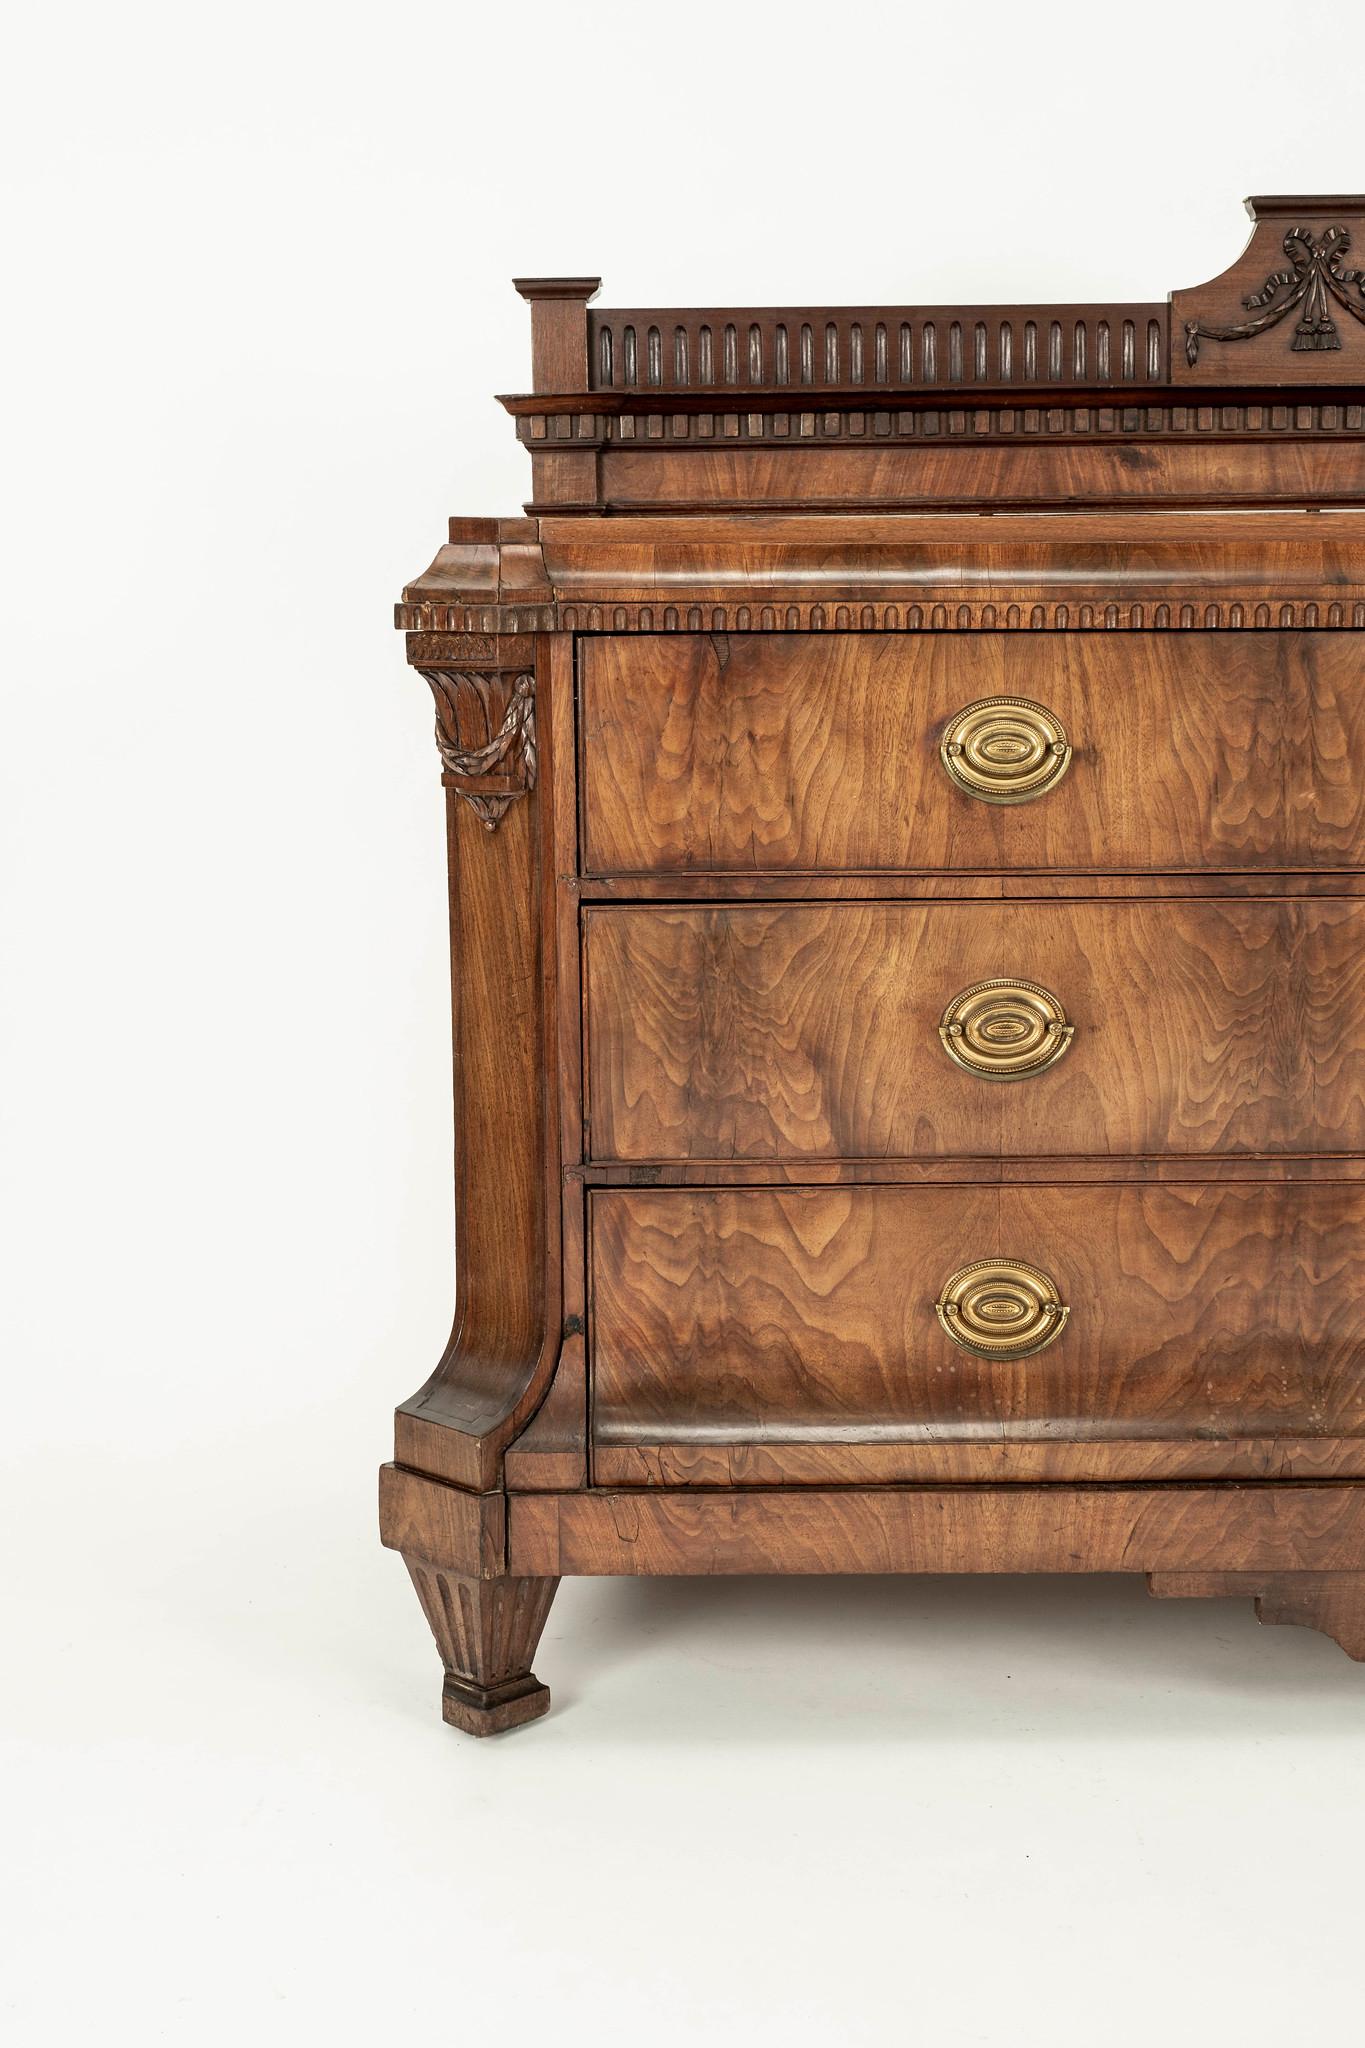 Neoclassical Revival 19th Century Neoclassical Commode For Sale